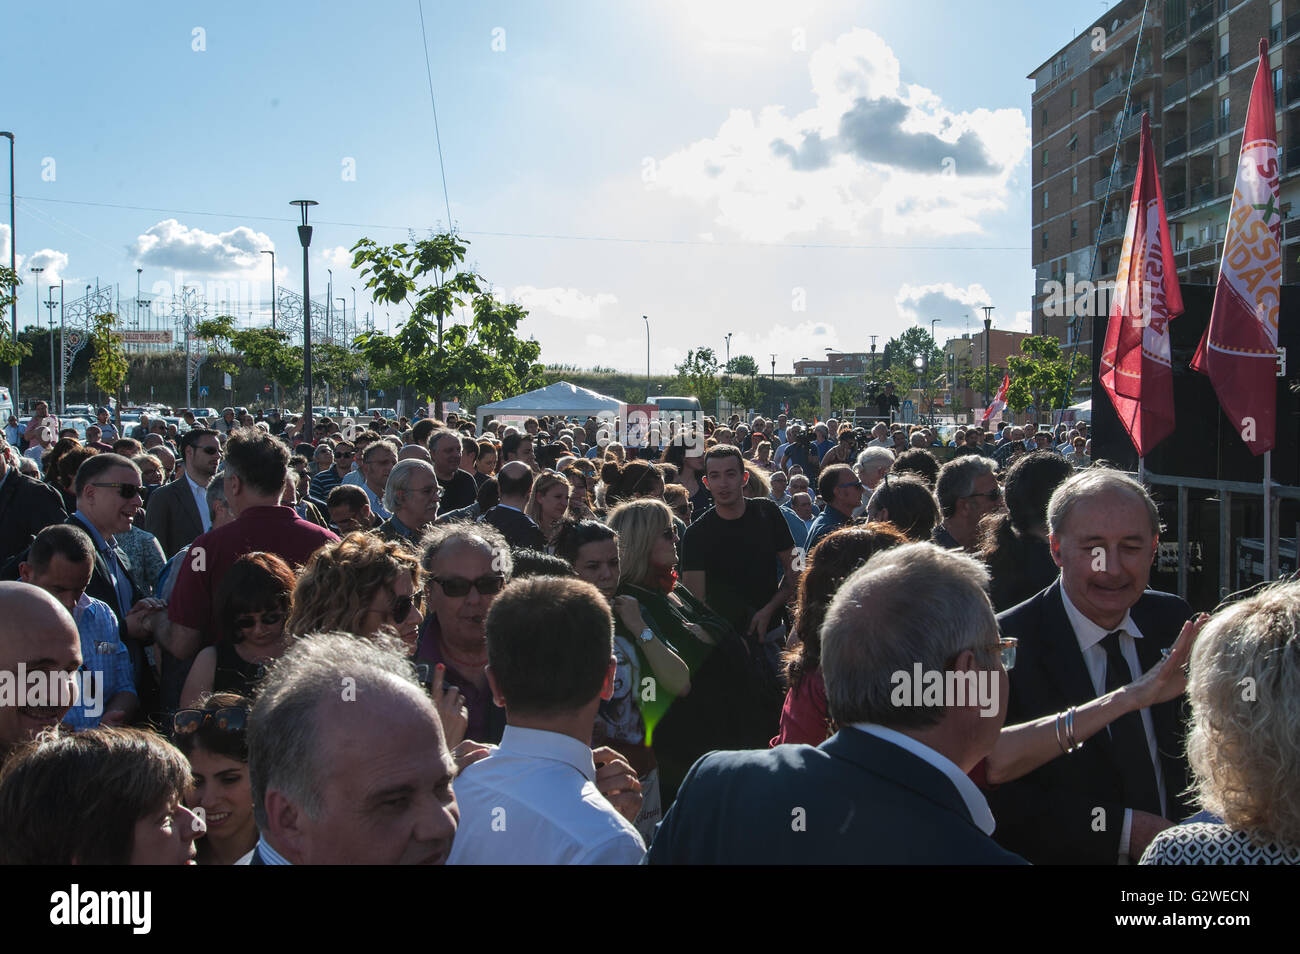 Rome, Italy. 03rd June, 2016. People attend the closing speech of Stefano Fassina candidate for mayor of Rome for the Left lists and for Civic Fassina Mayor, in the popular neighborhood of Centocelle. © Leo Claudio De Petris/Pacific Press/Alamy Live News Stock Photo